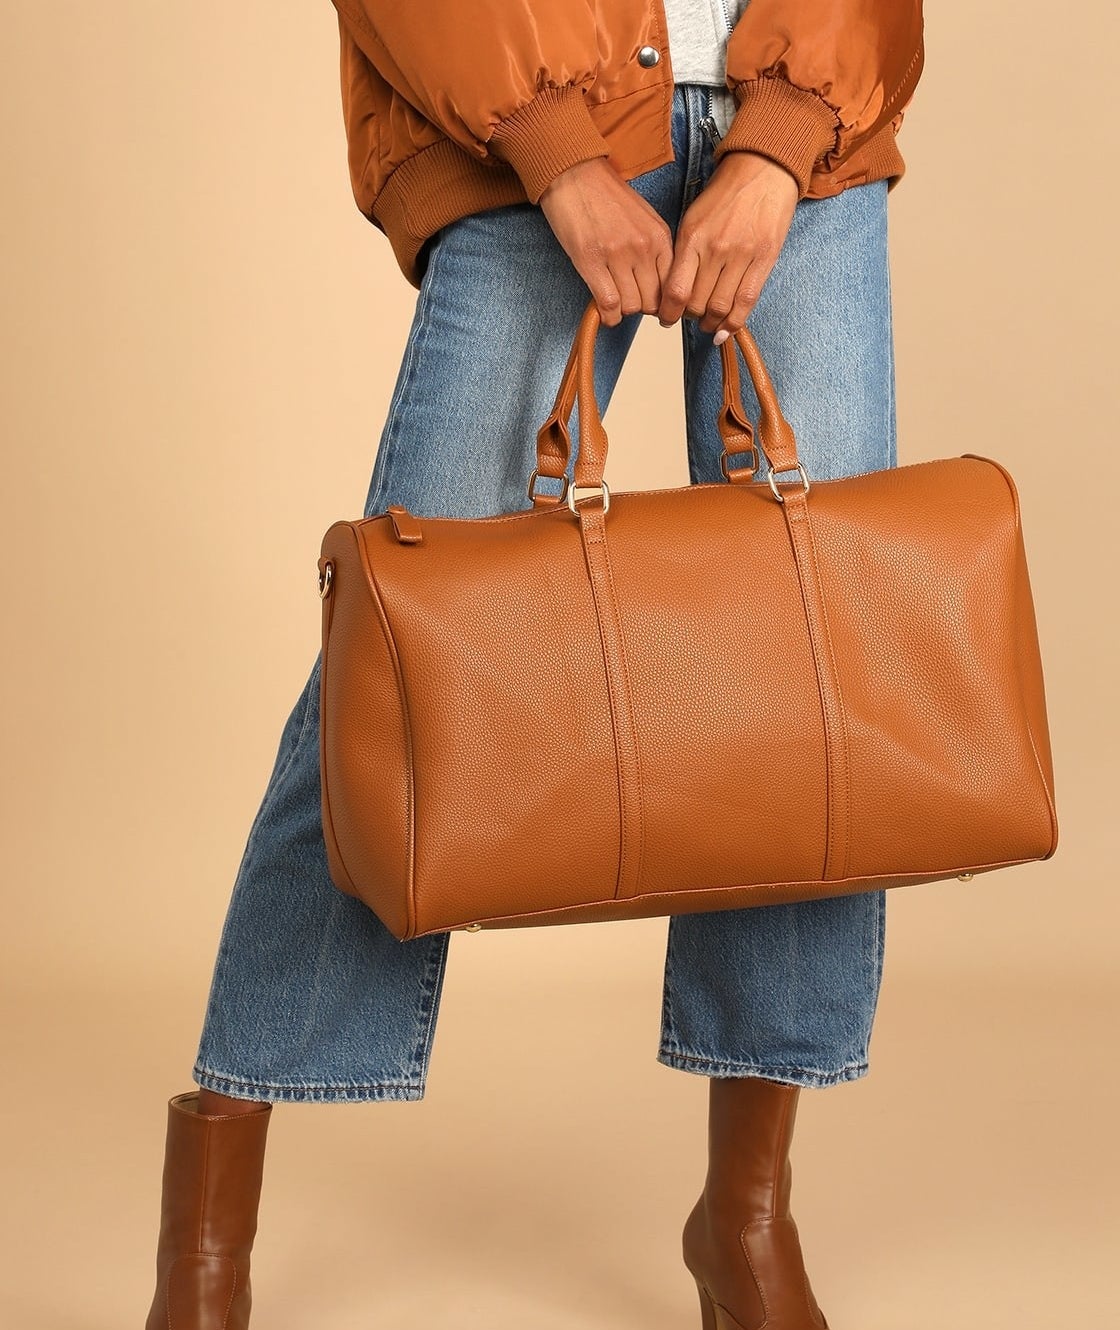 Model is holding the brown leather weekender bag